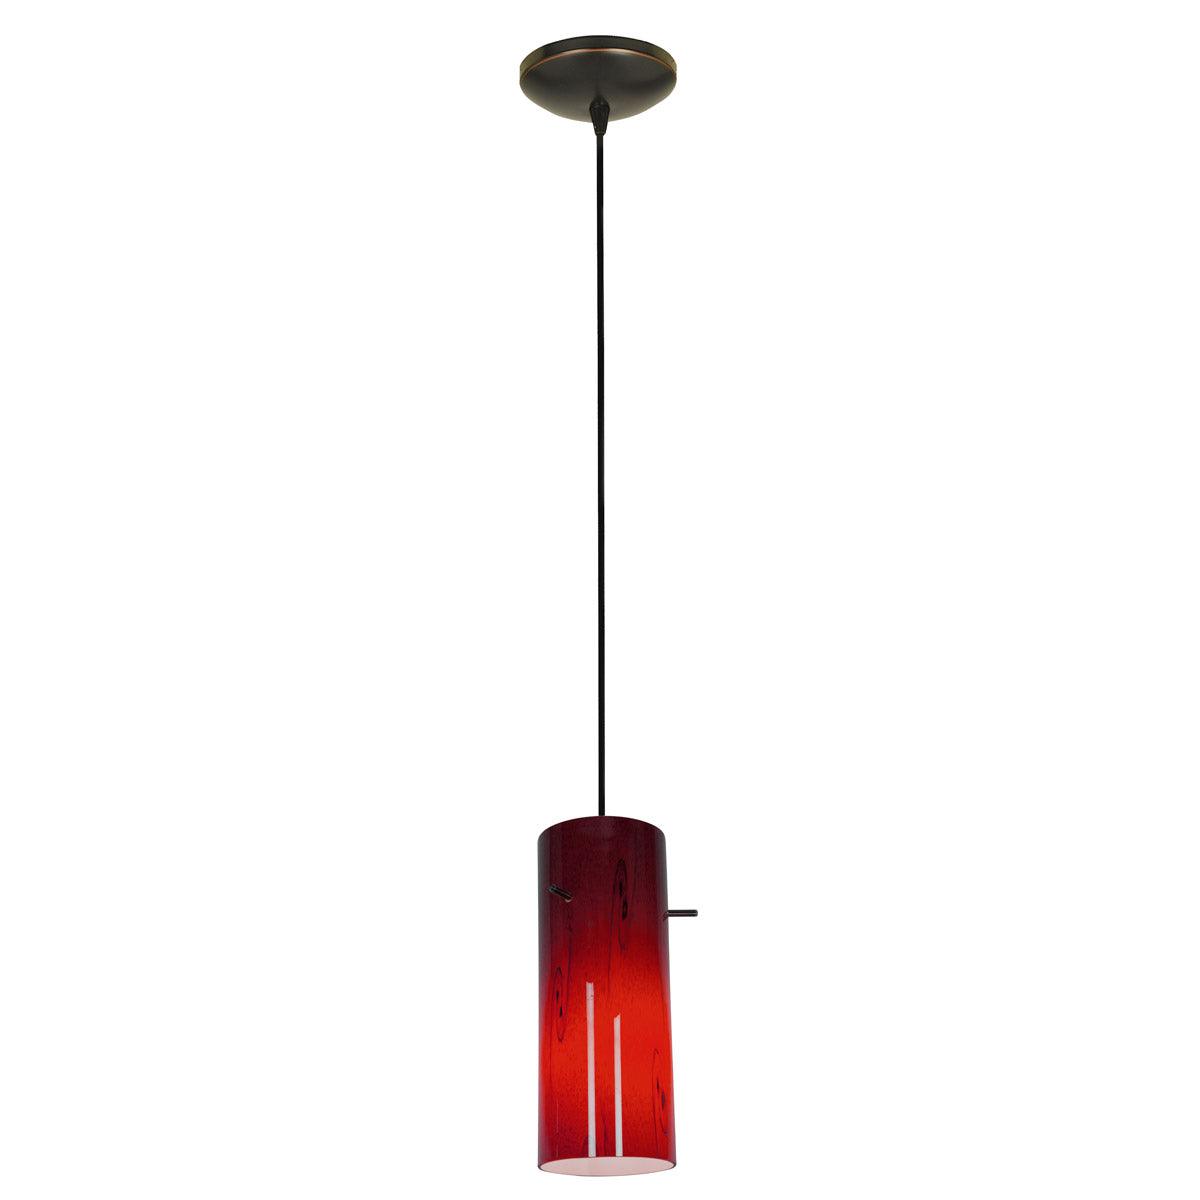 Cylinder 4 in. LED Pendant Light Red Glass